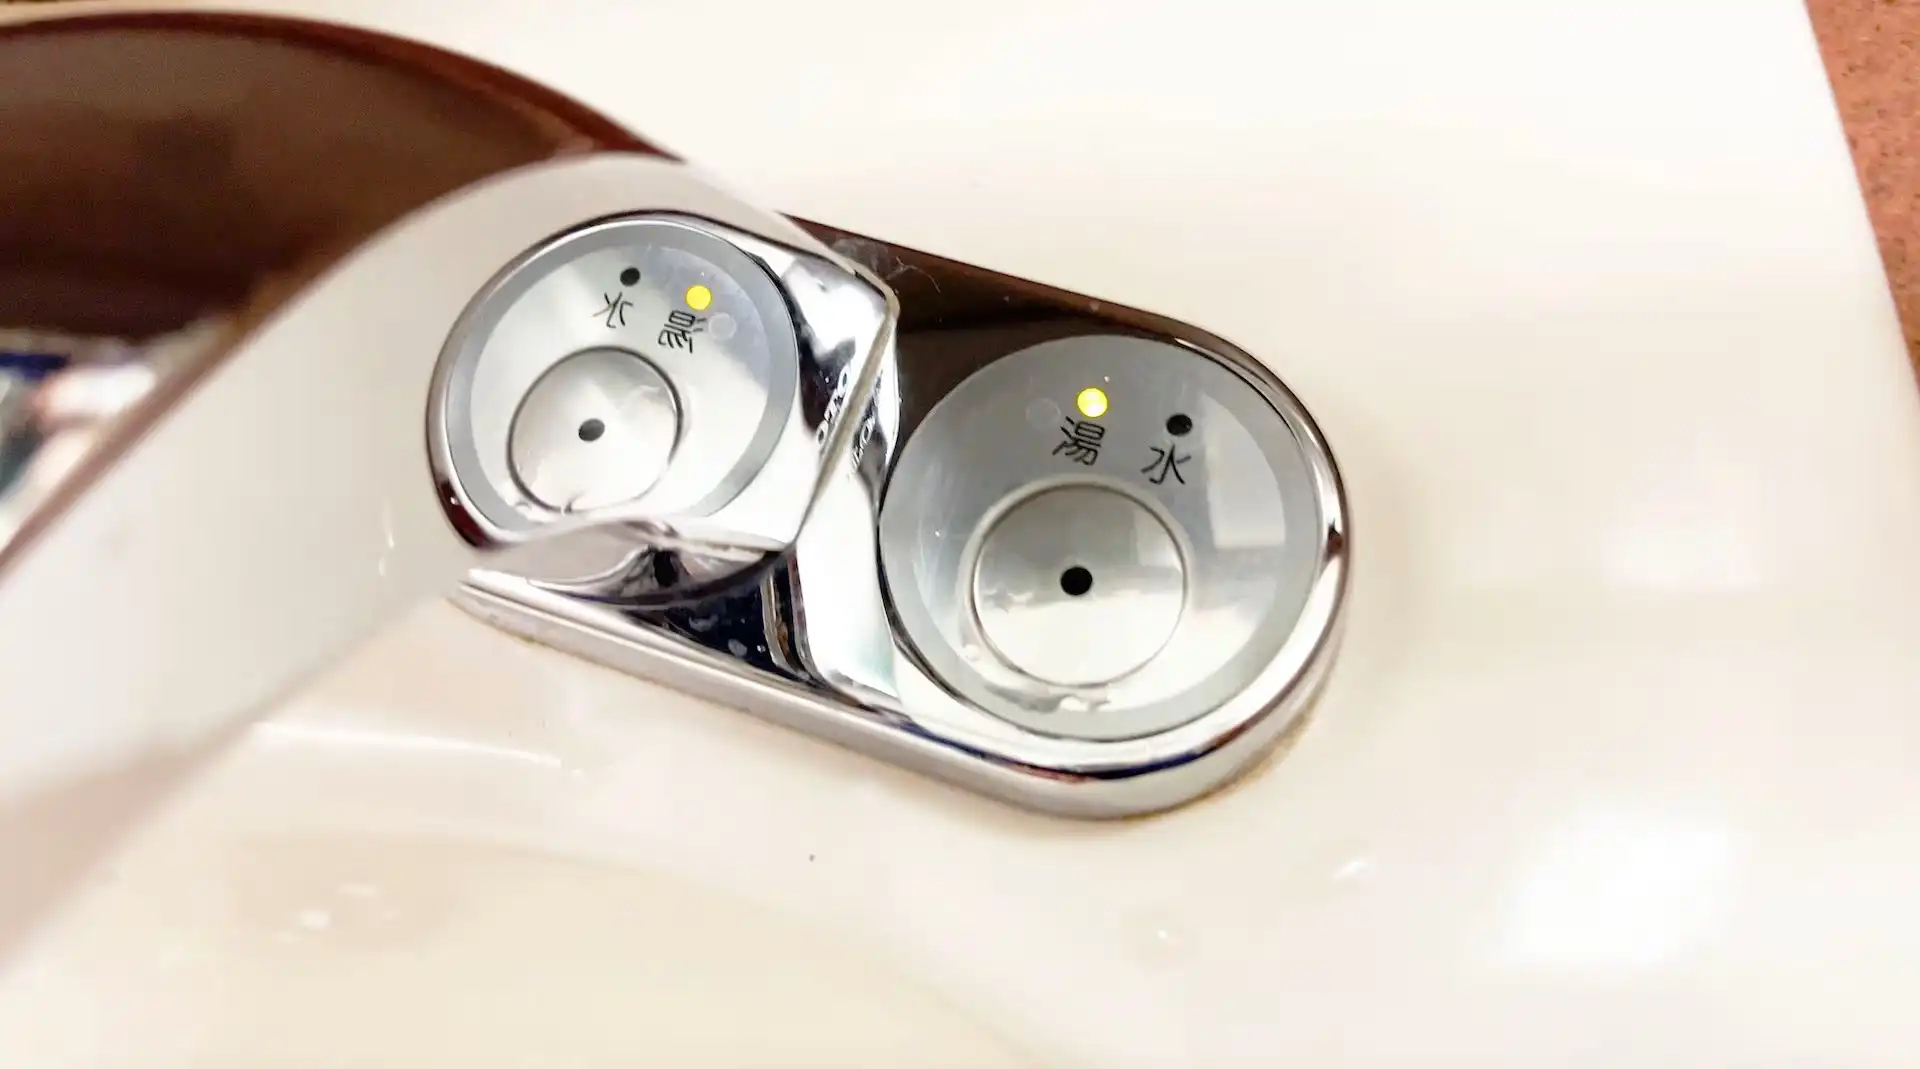 Cold and hot water on the faucet of the washbasin inside the sleeper express Sunrise Izumo button that allows you to select